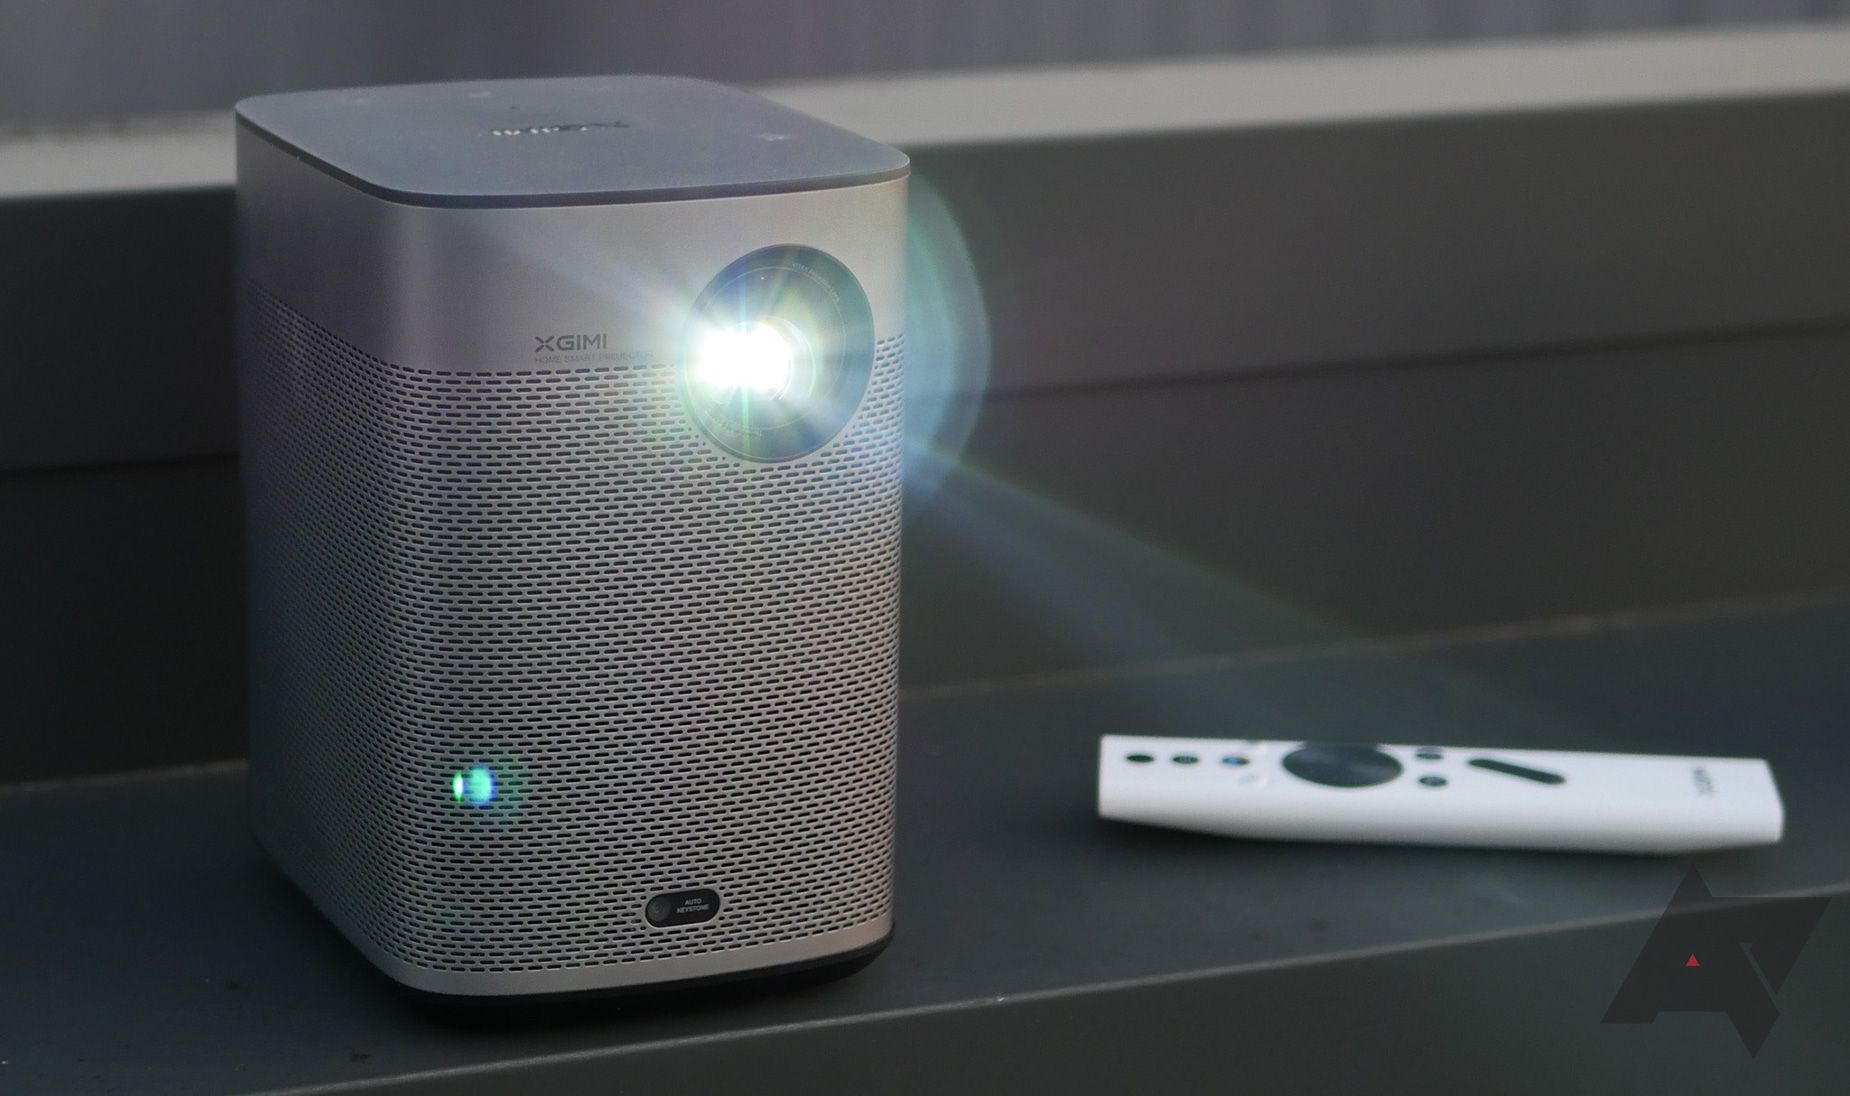 XGIMI Halo+ Projector Review